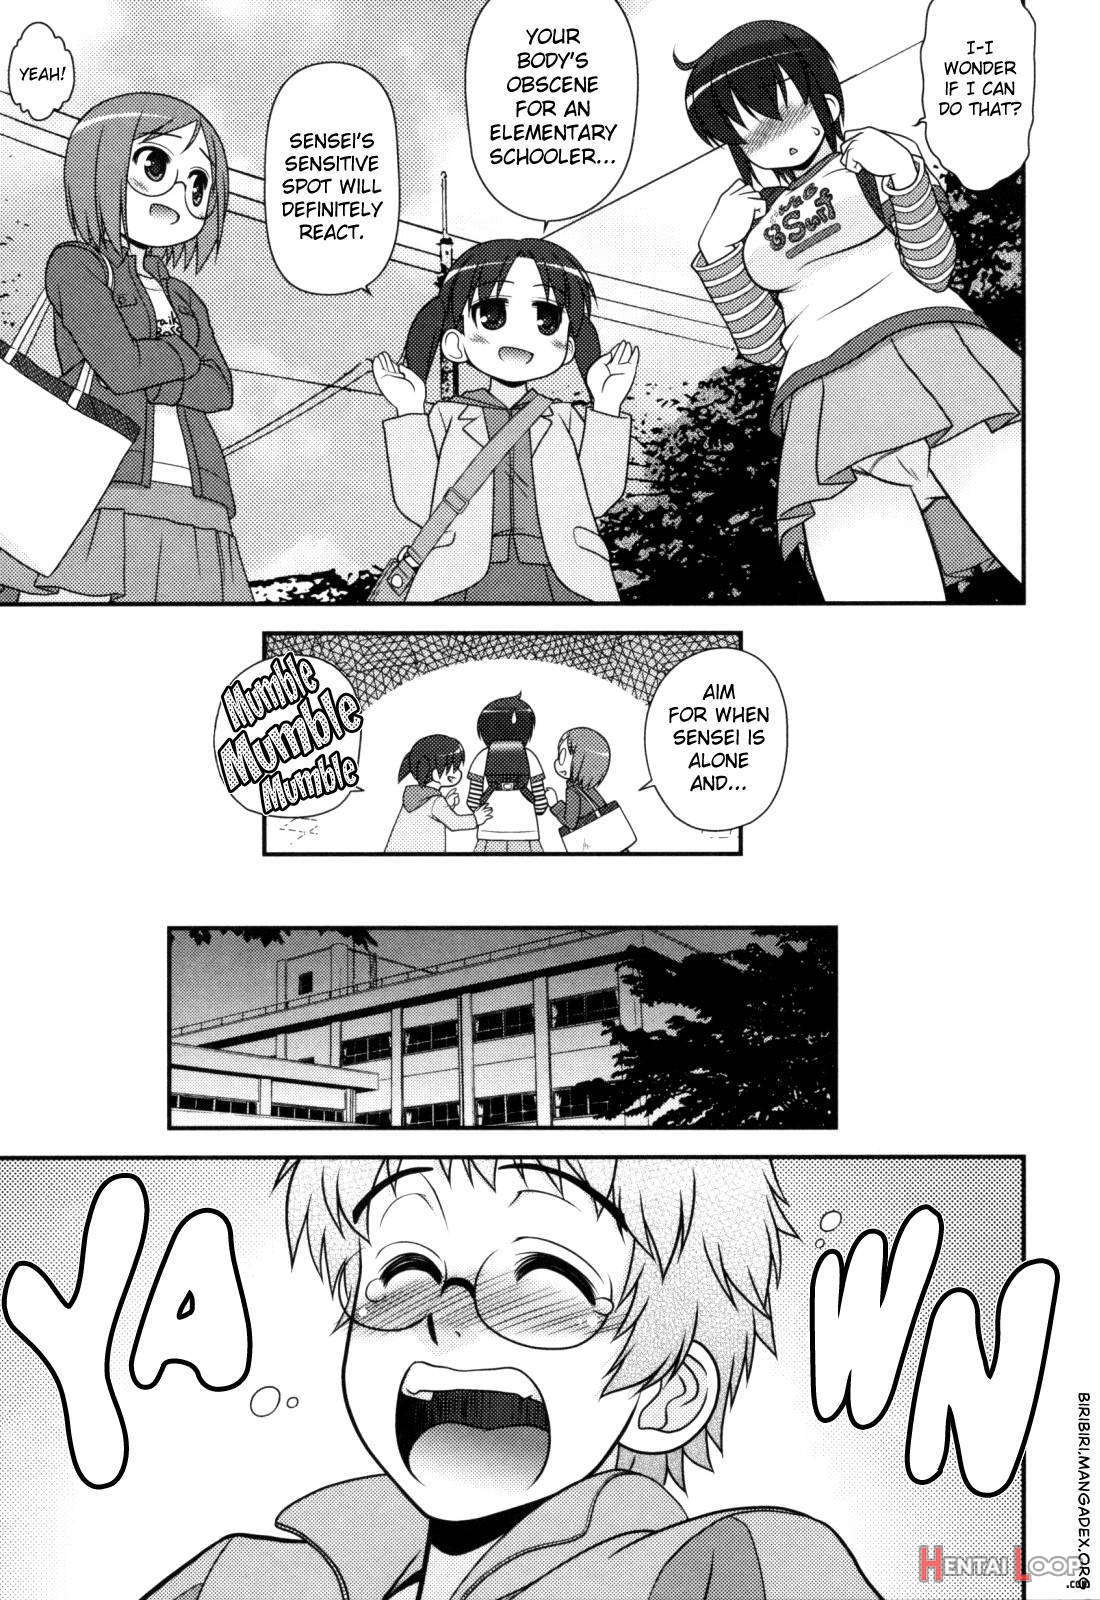 Aoi-chan Attack! page 8